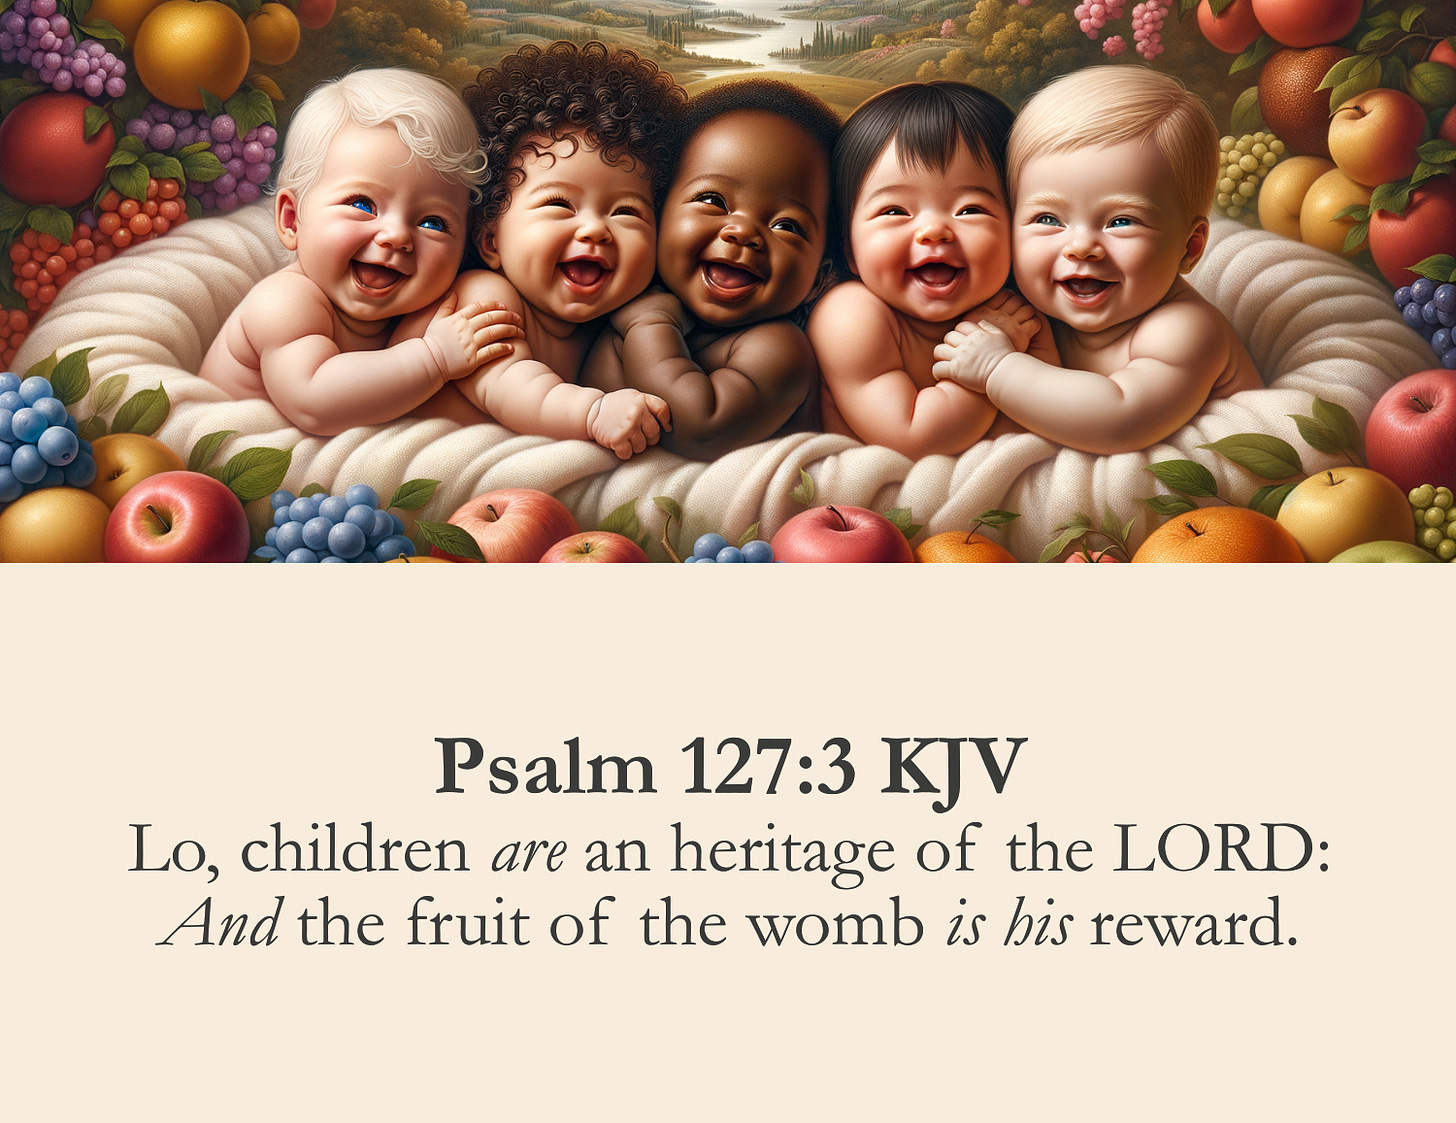 This image depicts five joyful, laughing babies of diverse ethnicities nestled amidst an abundance of colorful fruits like apples, oranges, grapes, and berries against a scenic landscape background. The infants' expressions radiate pure happiness as they lay cuddled together on what appears to be a soft blanket or cloth.  The biblical quote from Psalm 127:3 shown below celebrates children as a heritage and blessing from the Lord. The vibrant fruity imagery surrounding the babies reinforces this notion of new life and offspring being a wonderful gift, creating an uplifting scene of multicultural innocence, joy, and the preciousness of children.